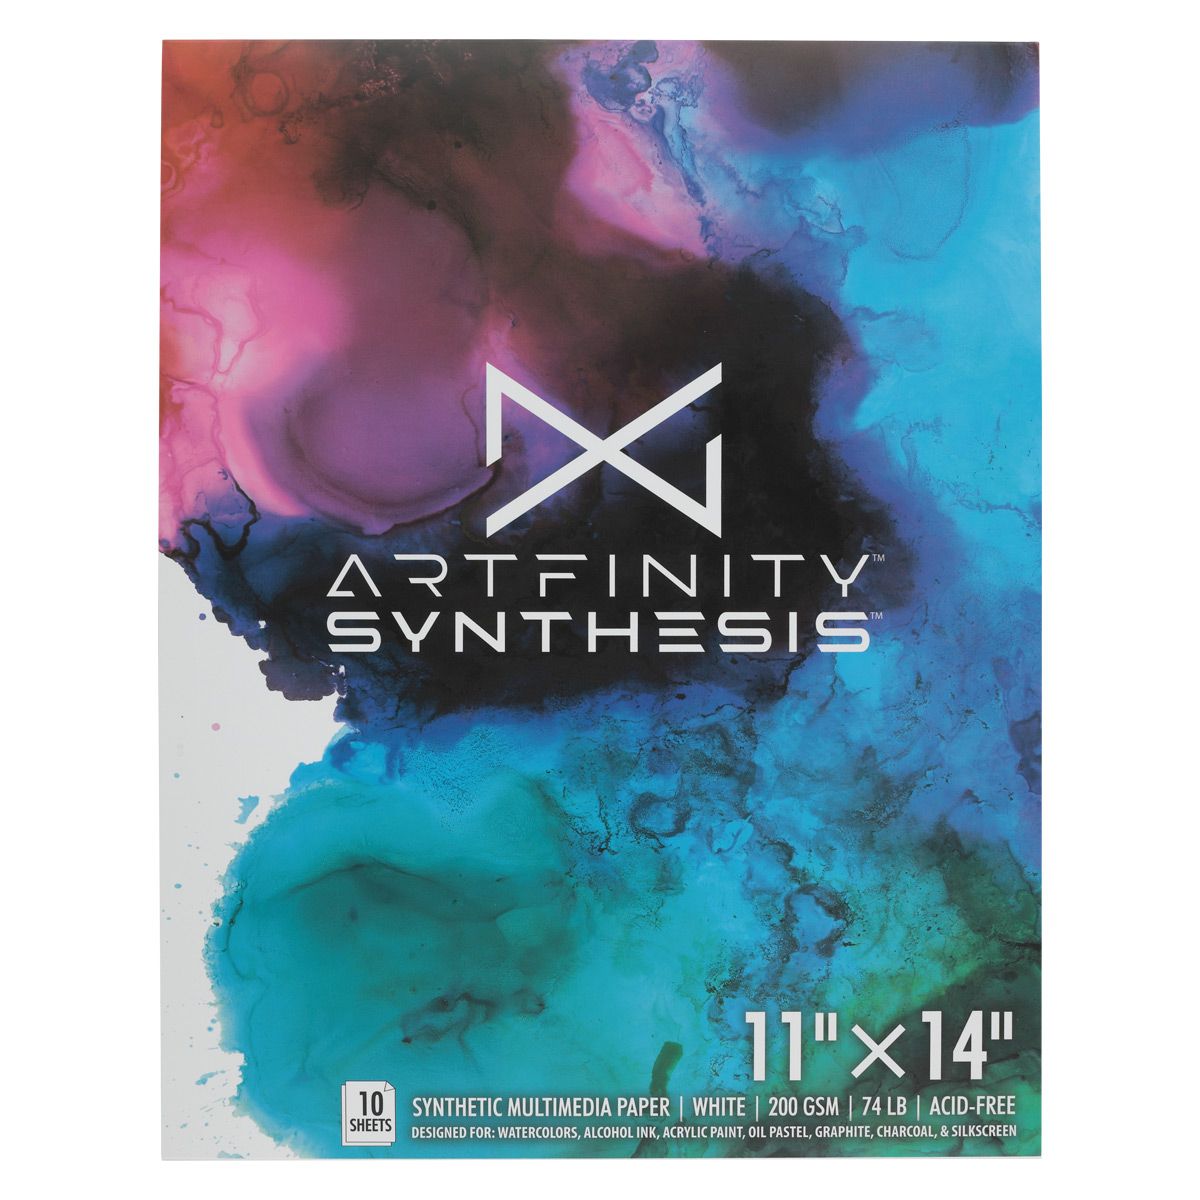 Artfinity Synthesis Multimedia Watercolor Paper Pad, 11x14", 10 Sheets